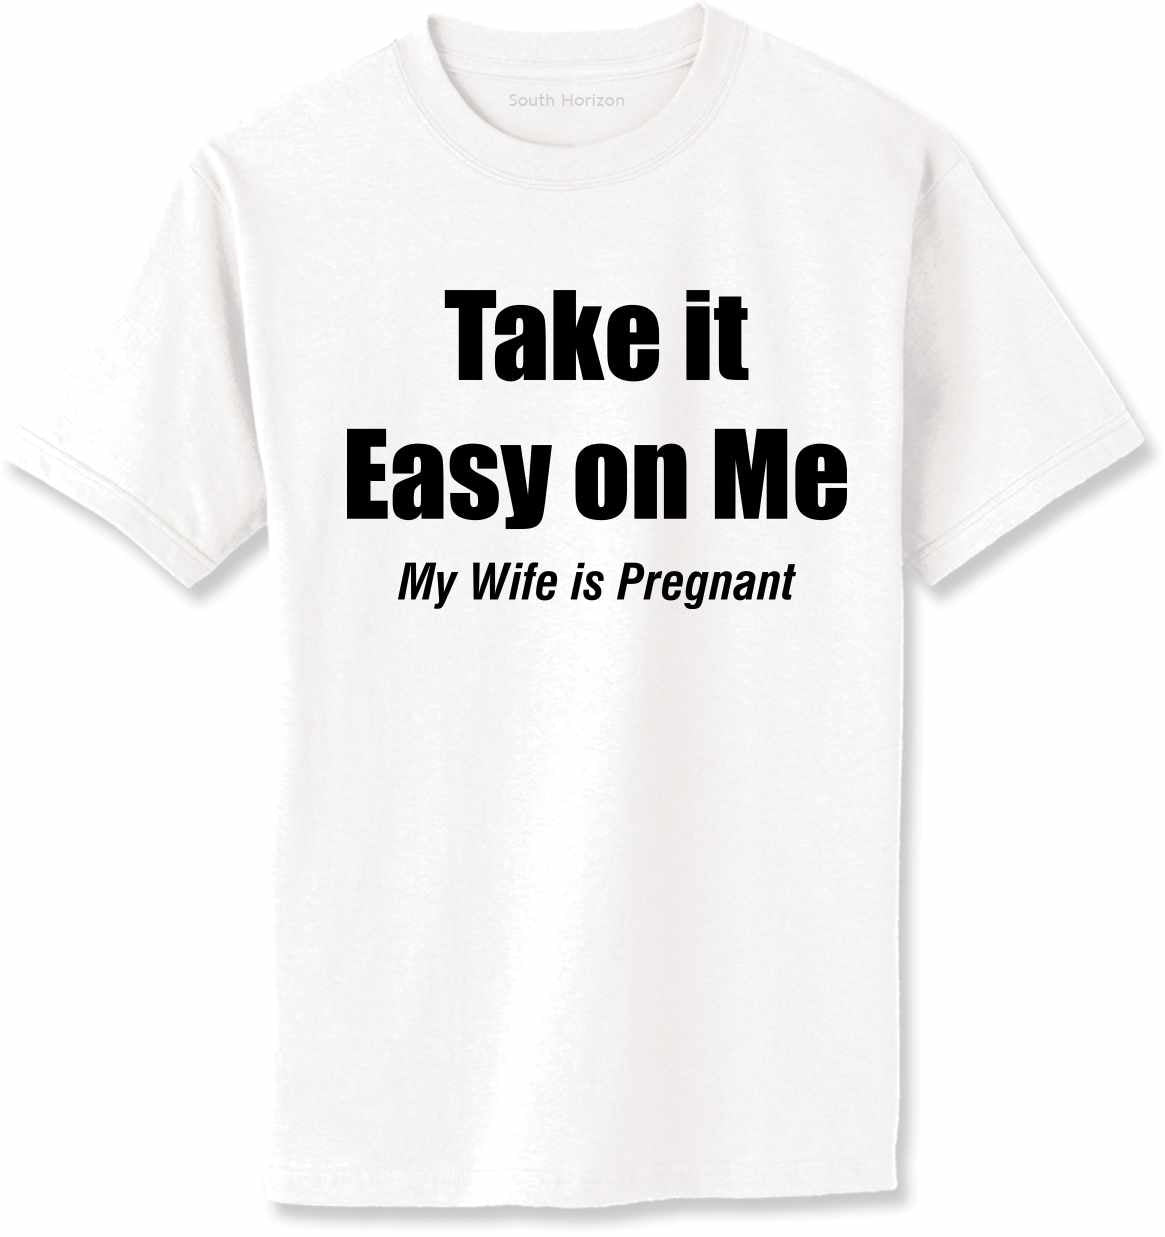 Take It Easy On Me, My Wife Is Pregnant Adult T-Shirt (#1123-1)